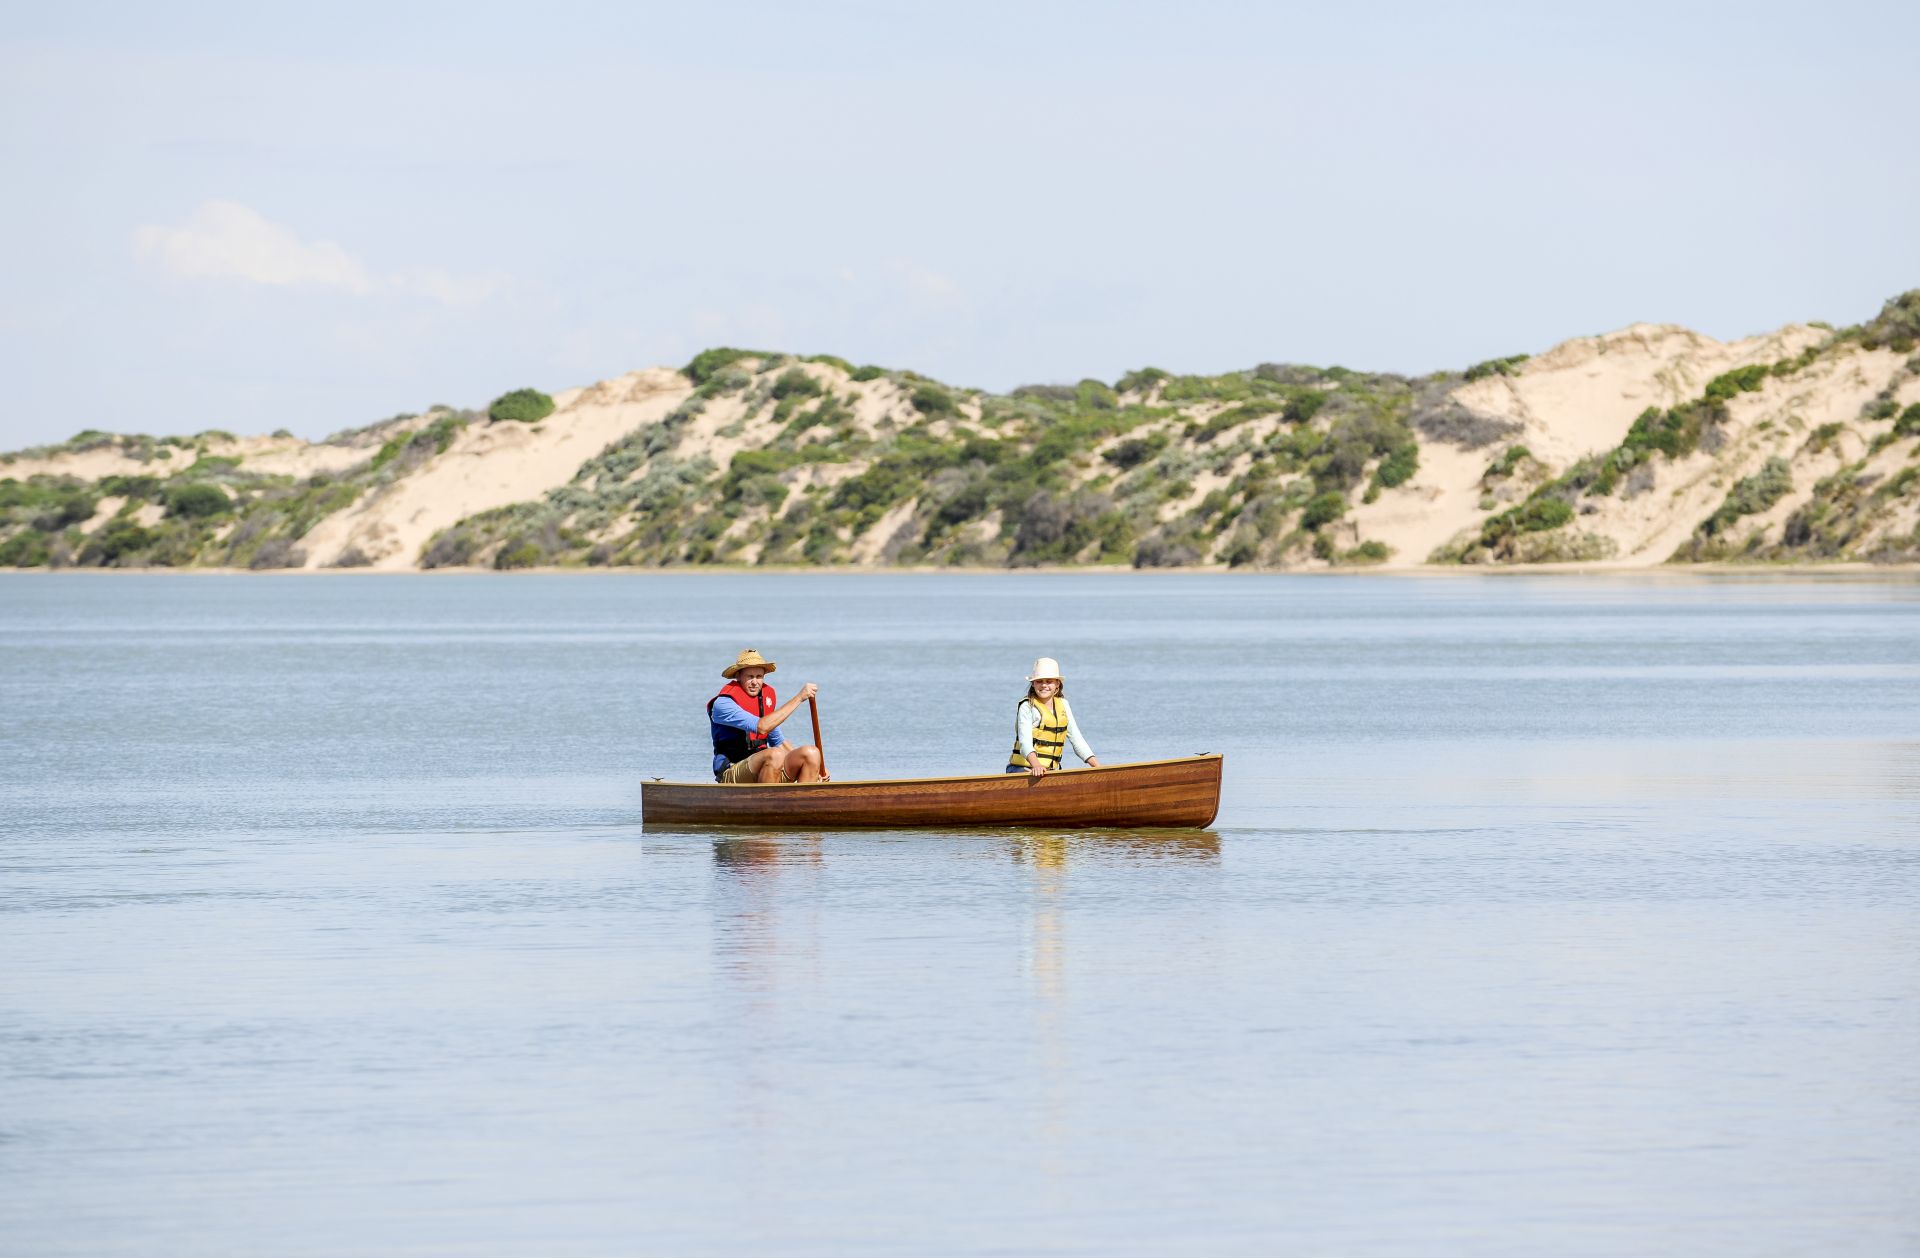 Canoeing (Coorong National Park)